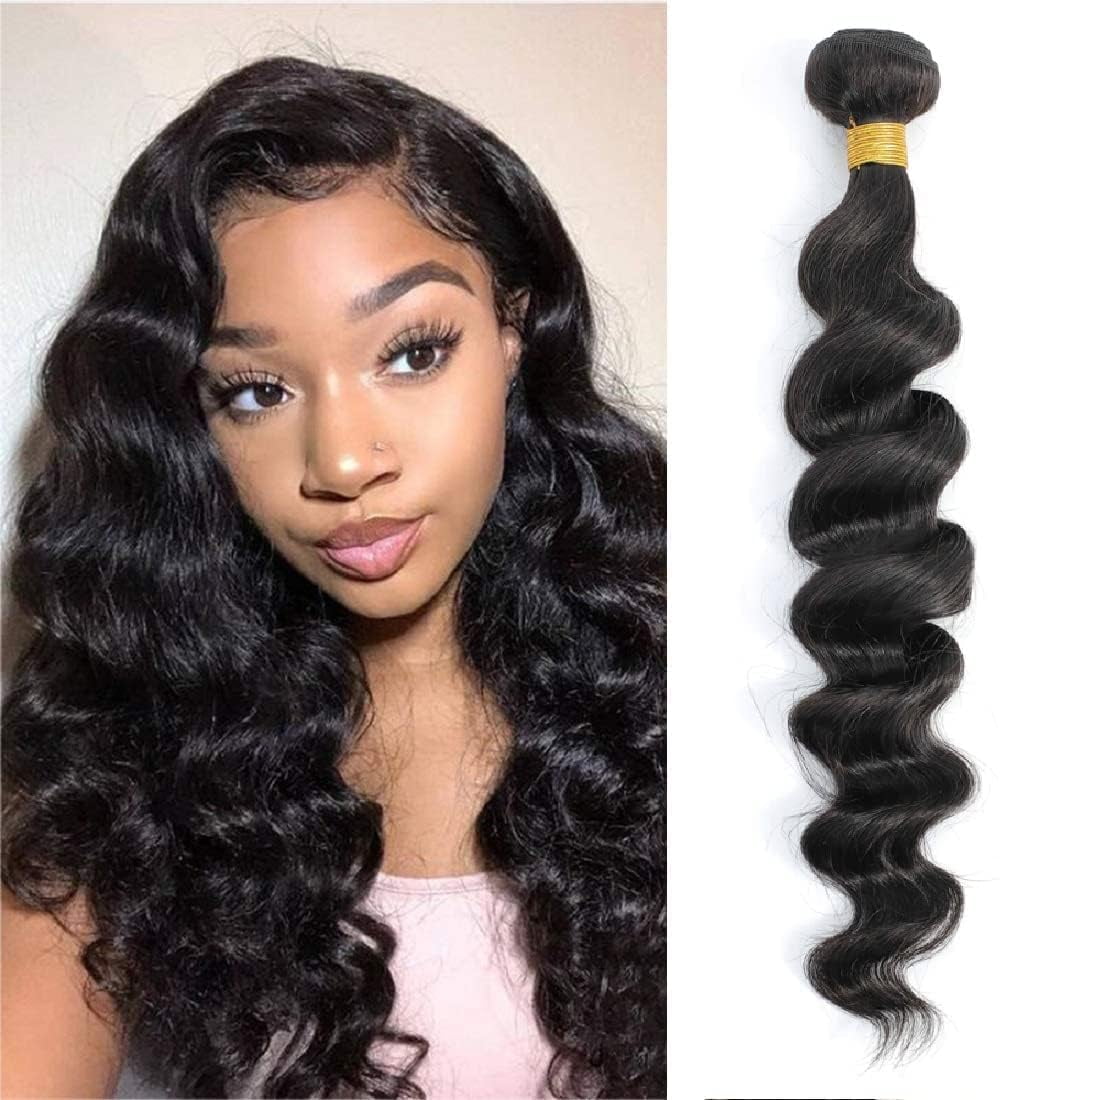 Brazilian Virgin Deep WaveCurly Human Hair Bundles with Lace Closure 100  Unprocessed Wet and Wavy Curly Hair Weave Weft Hair Extensions Natural  Black 8 4 Bundles With 4x4 Lace Closure  Black